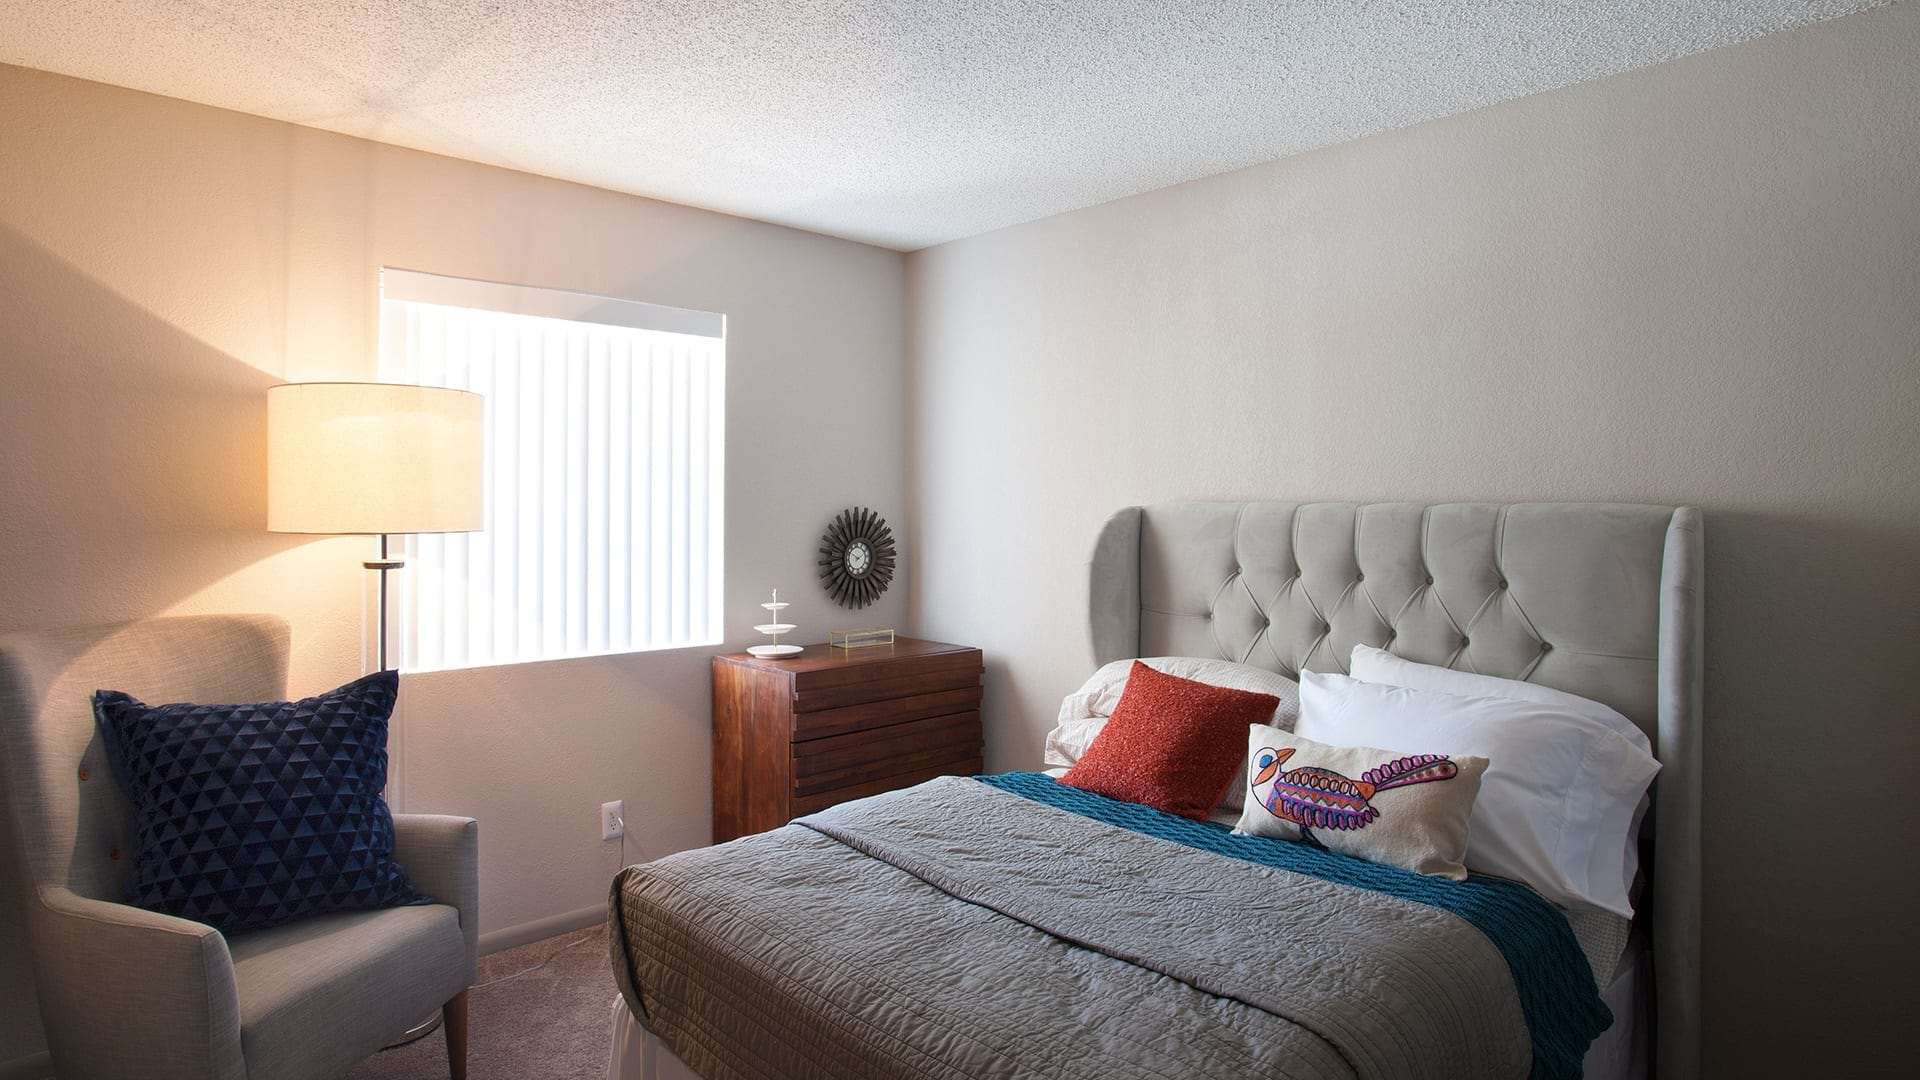 Charming Bedroom with Natural Lighting at Our Apartments Near Gilbert, AZ